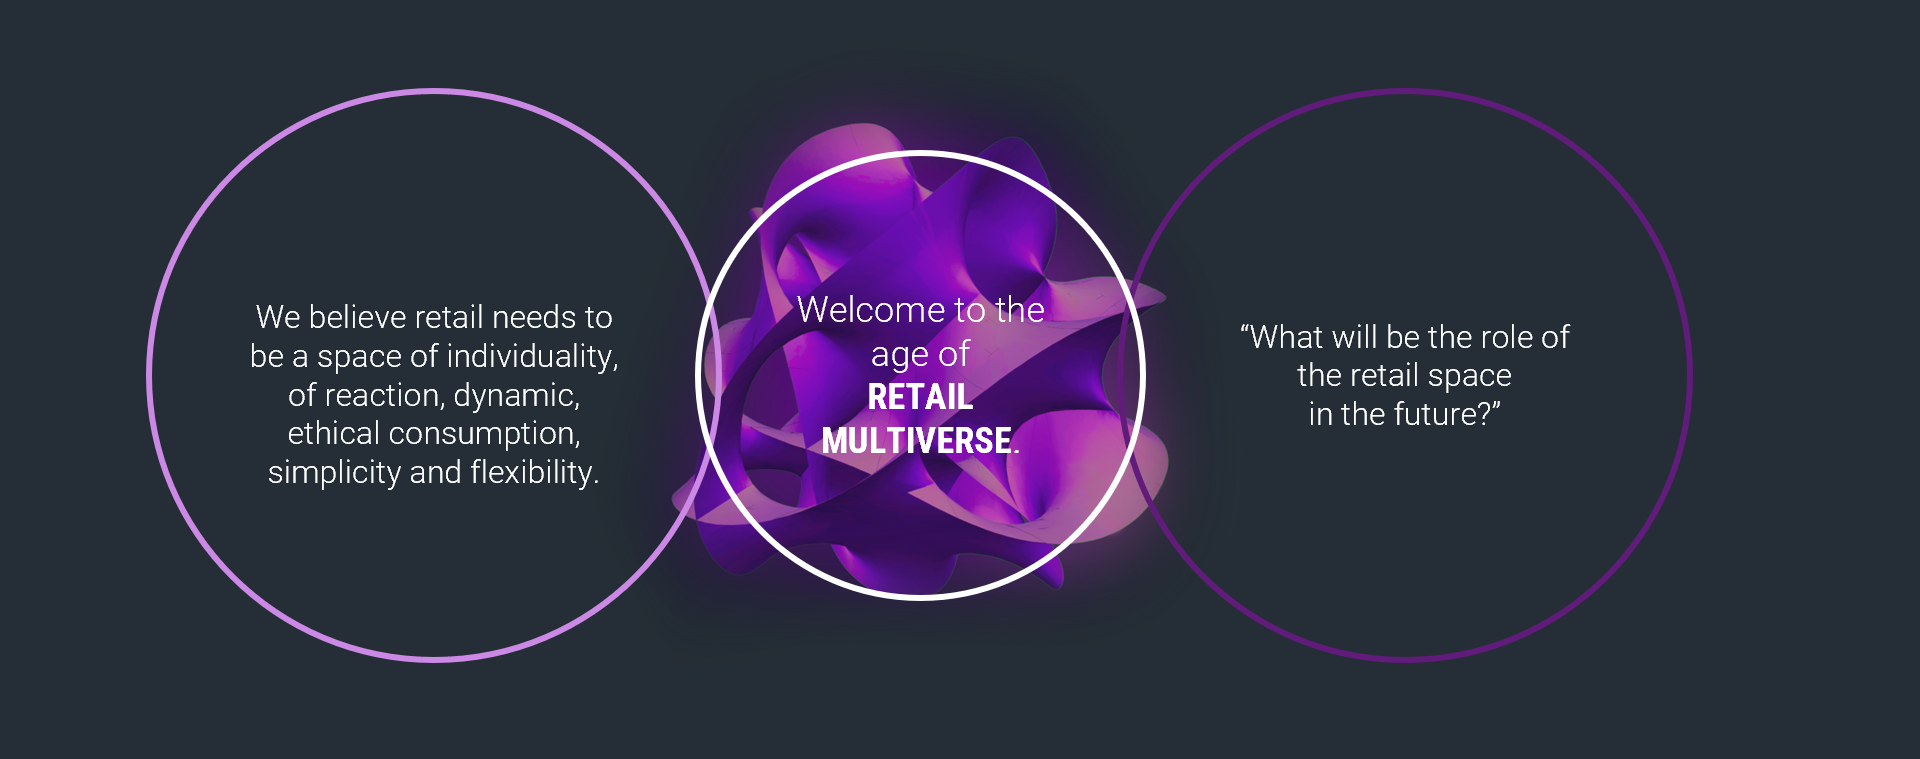 Entry to the Retail Multiverse | rpc